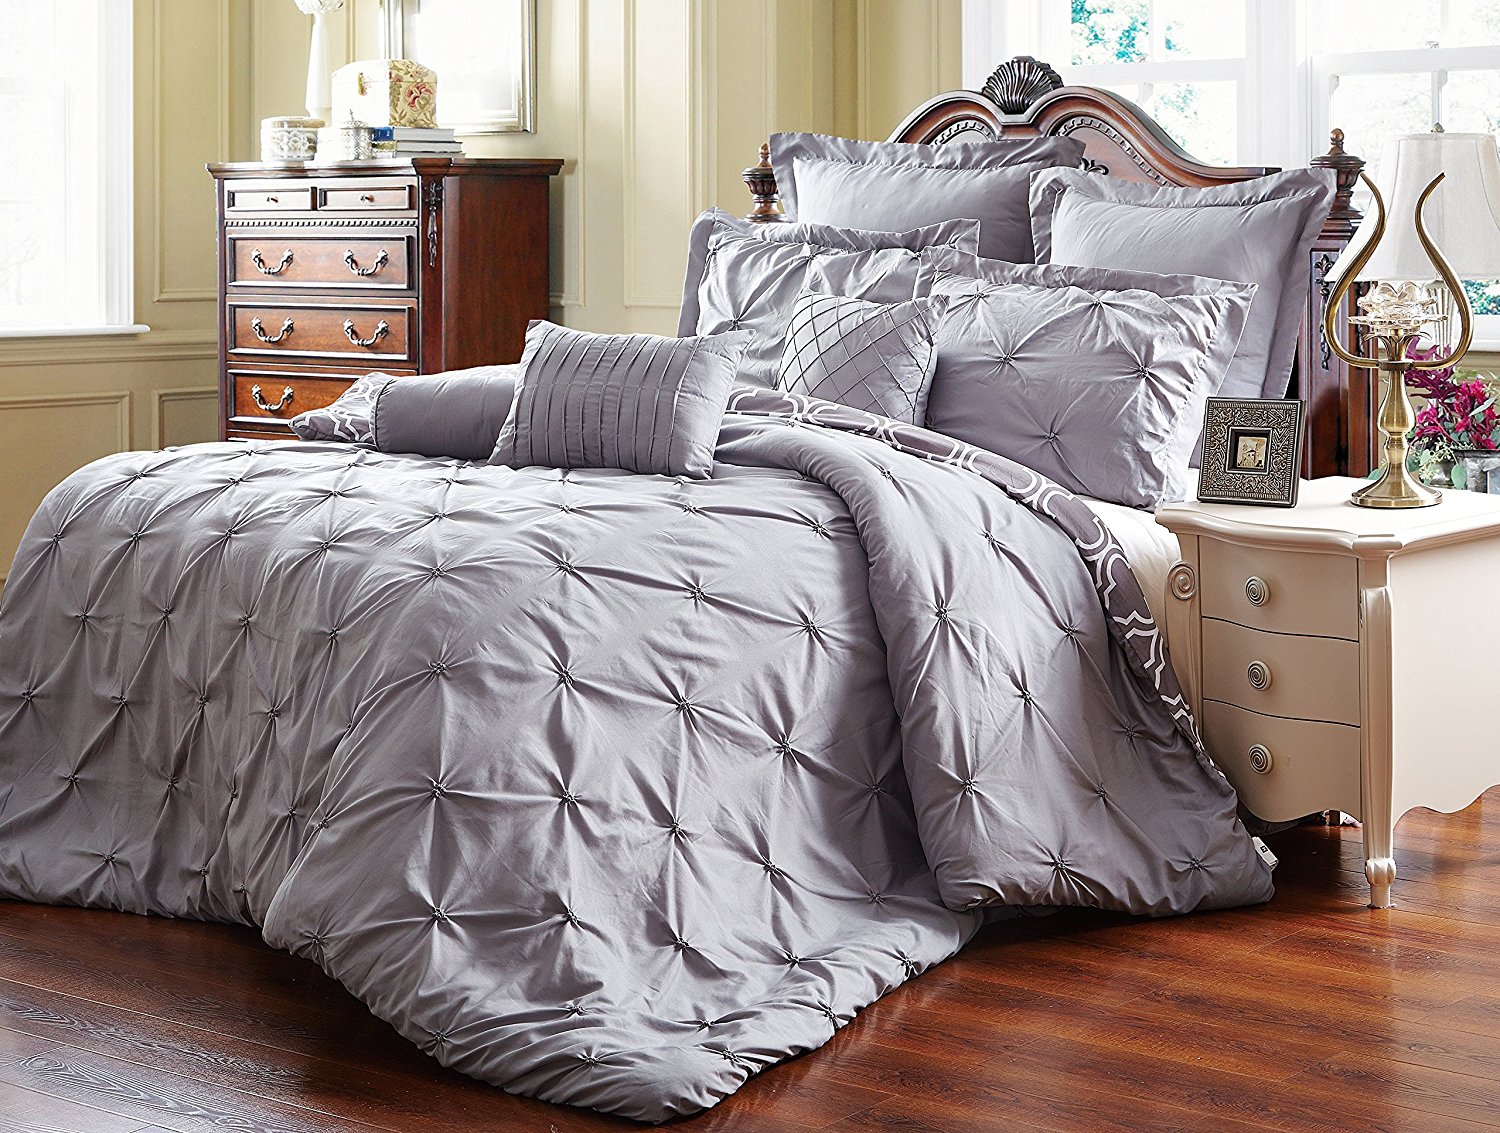 Unique Home 8 Piece Reversible Pinch Pleat Comforter Set Fade Resistant, Wrinkle Free, No Ironing Necessary, Super Soft, Cal King, Grey